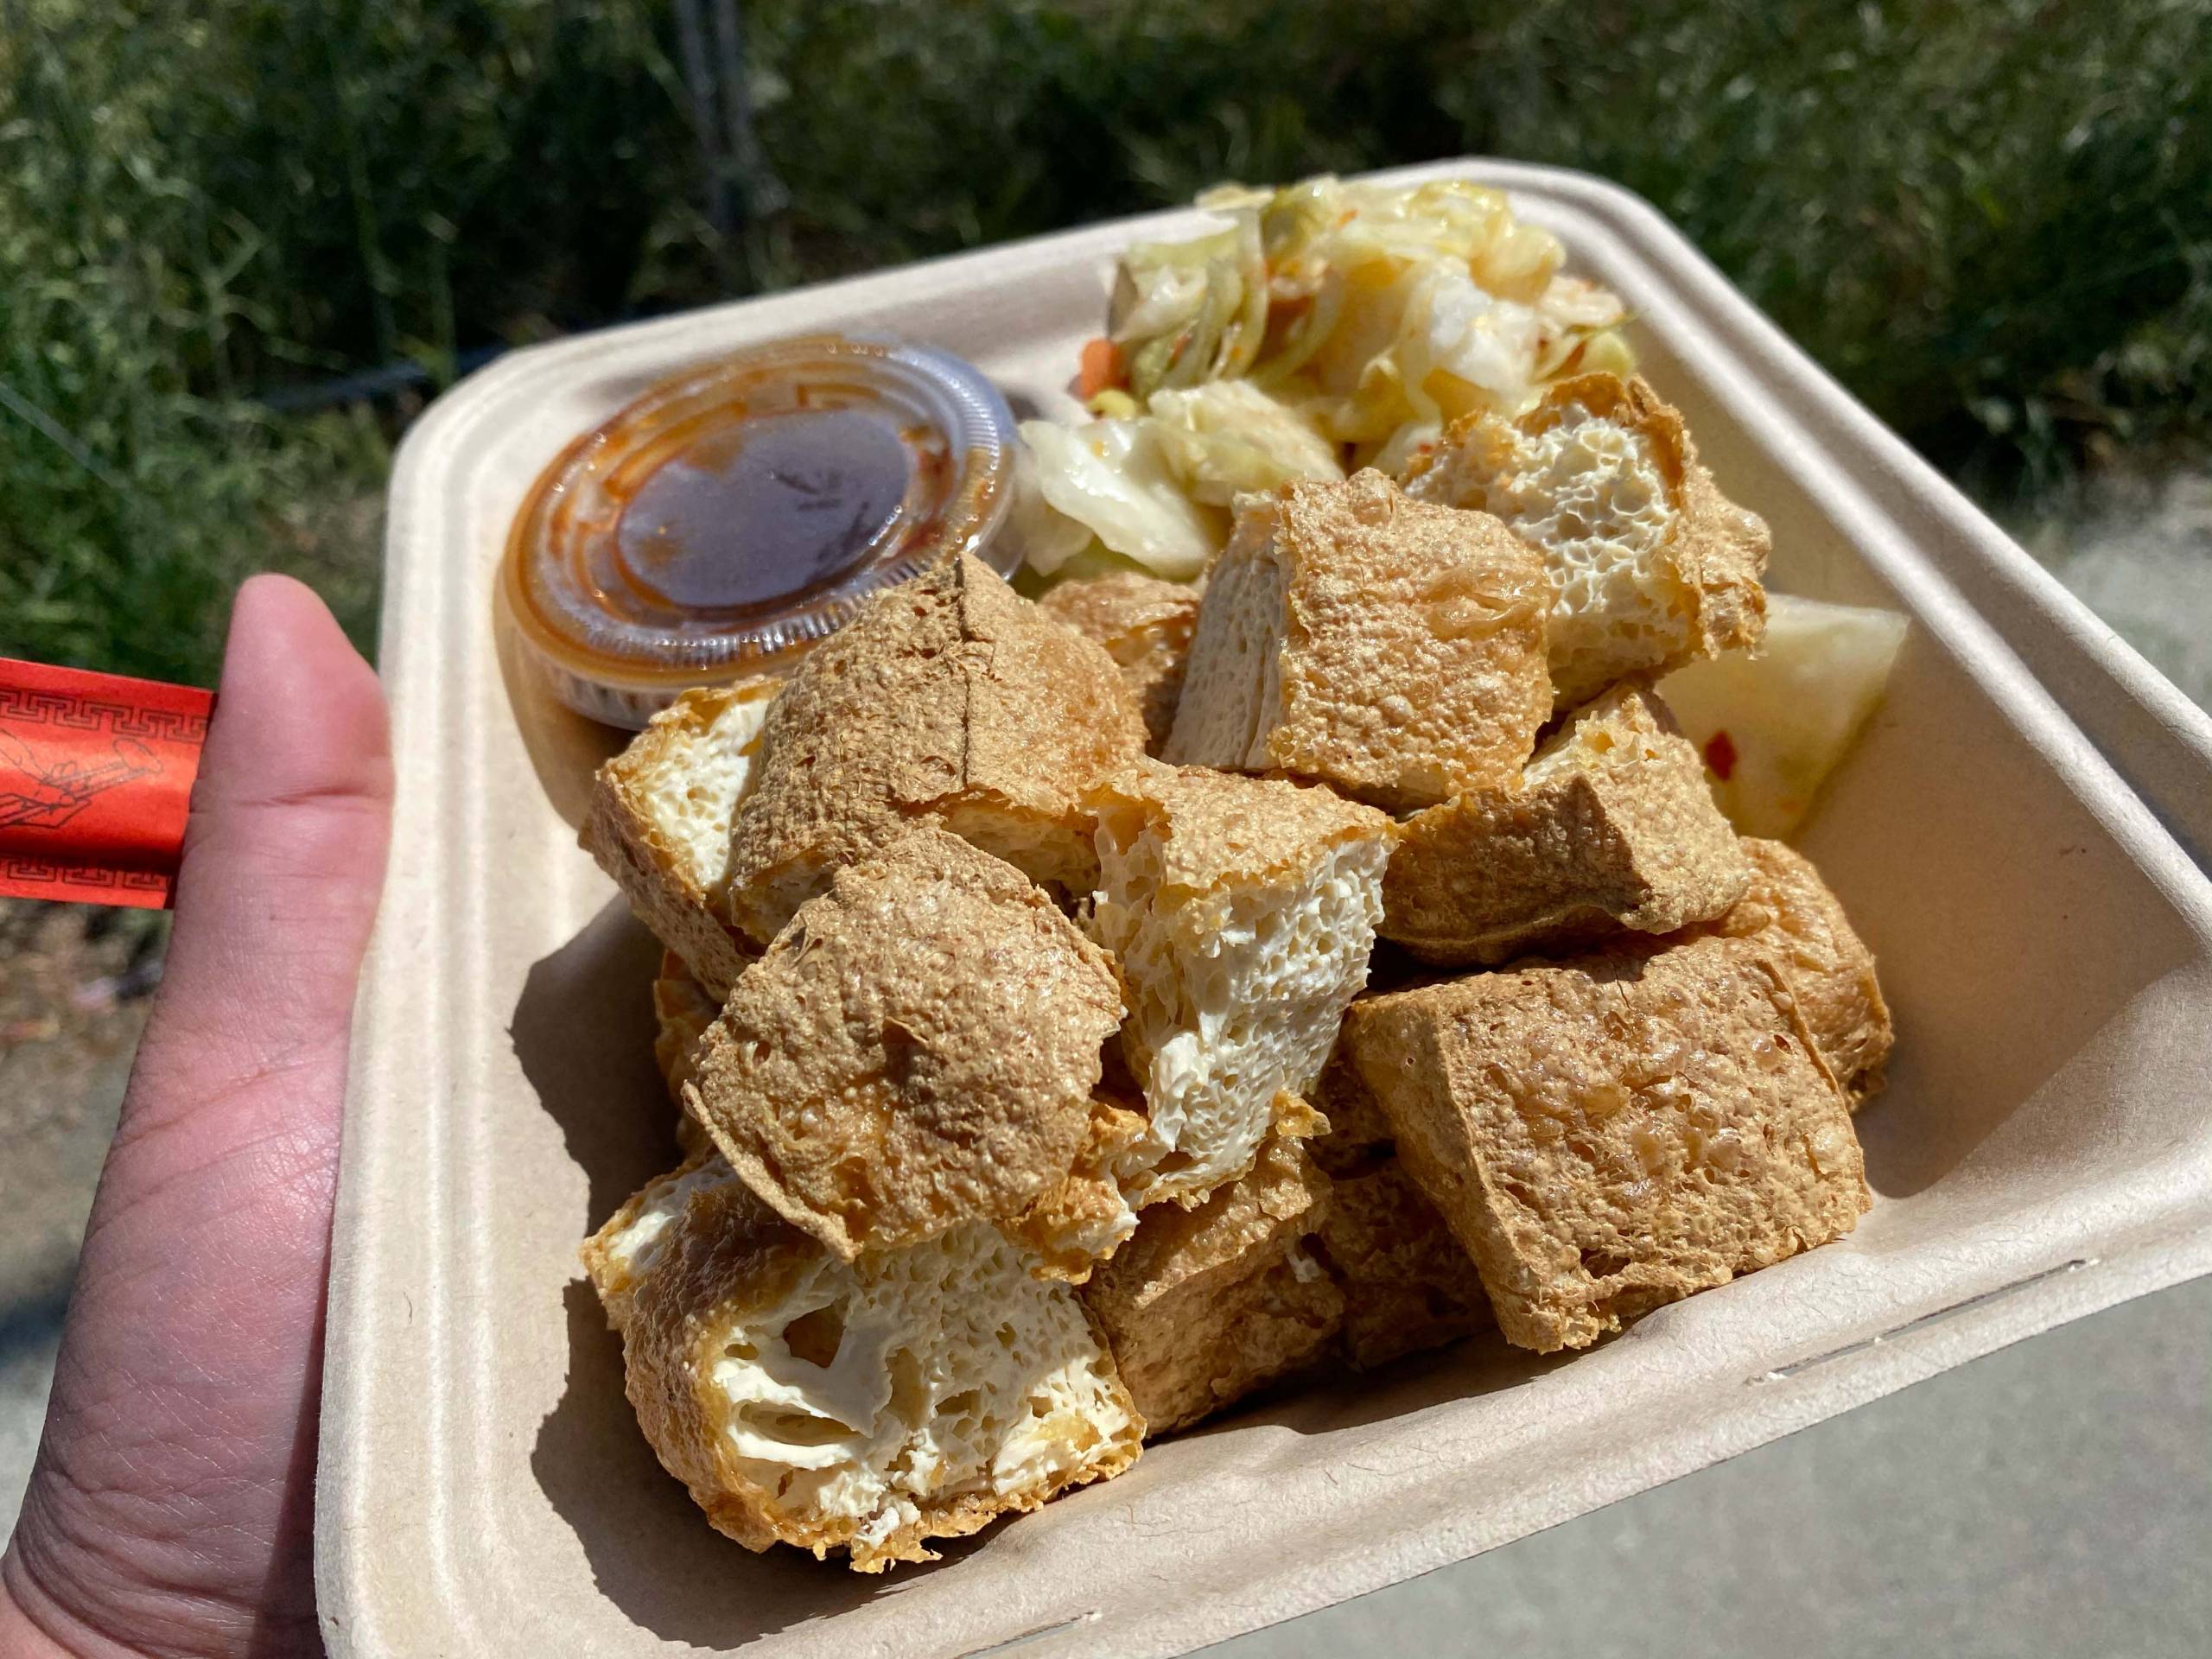 A takeout container of fried stinky tofu, with pickled cabbage and a tub of sauce on the side.